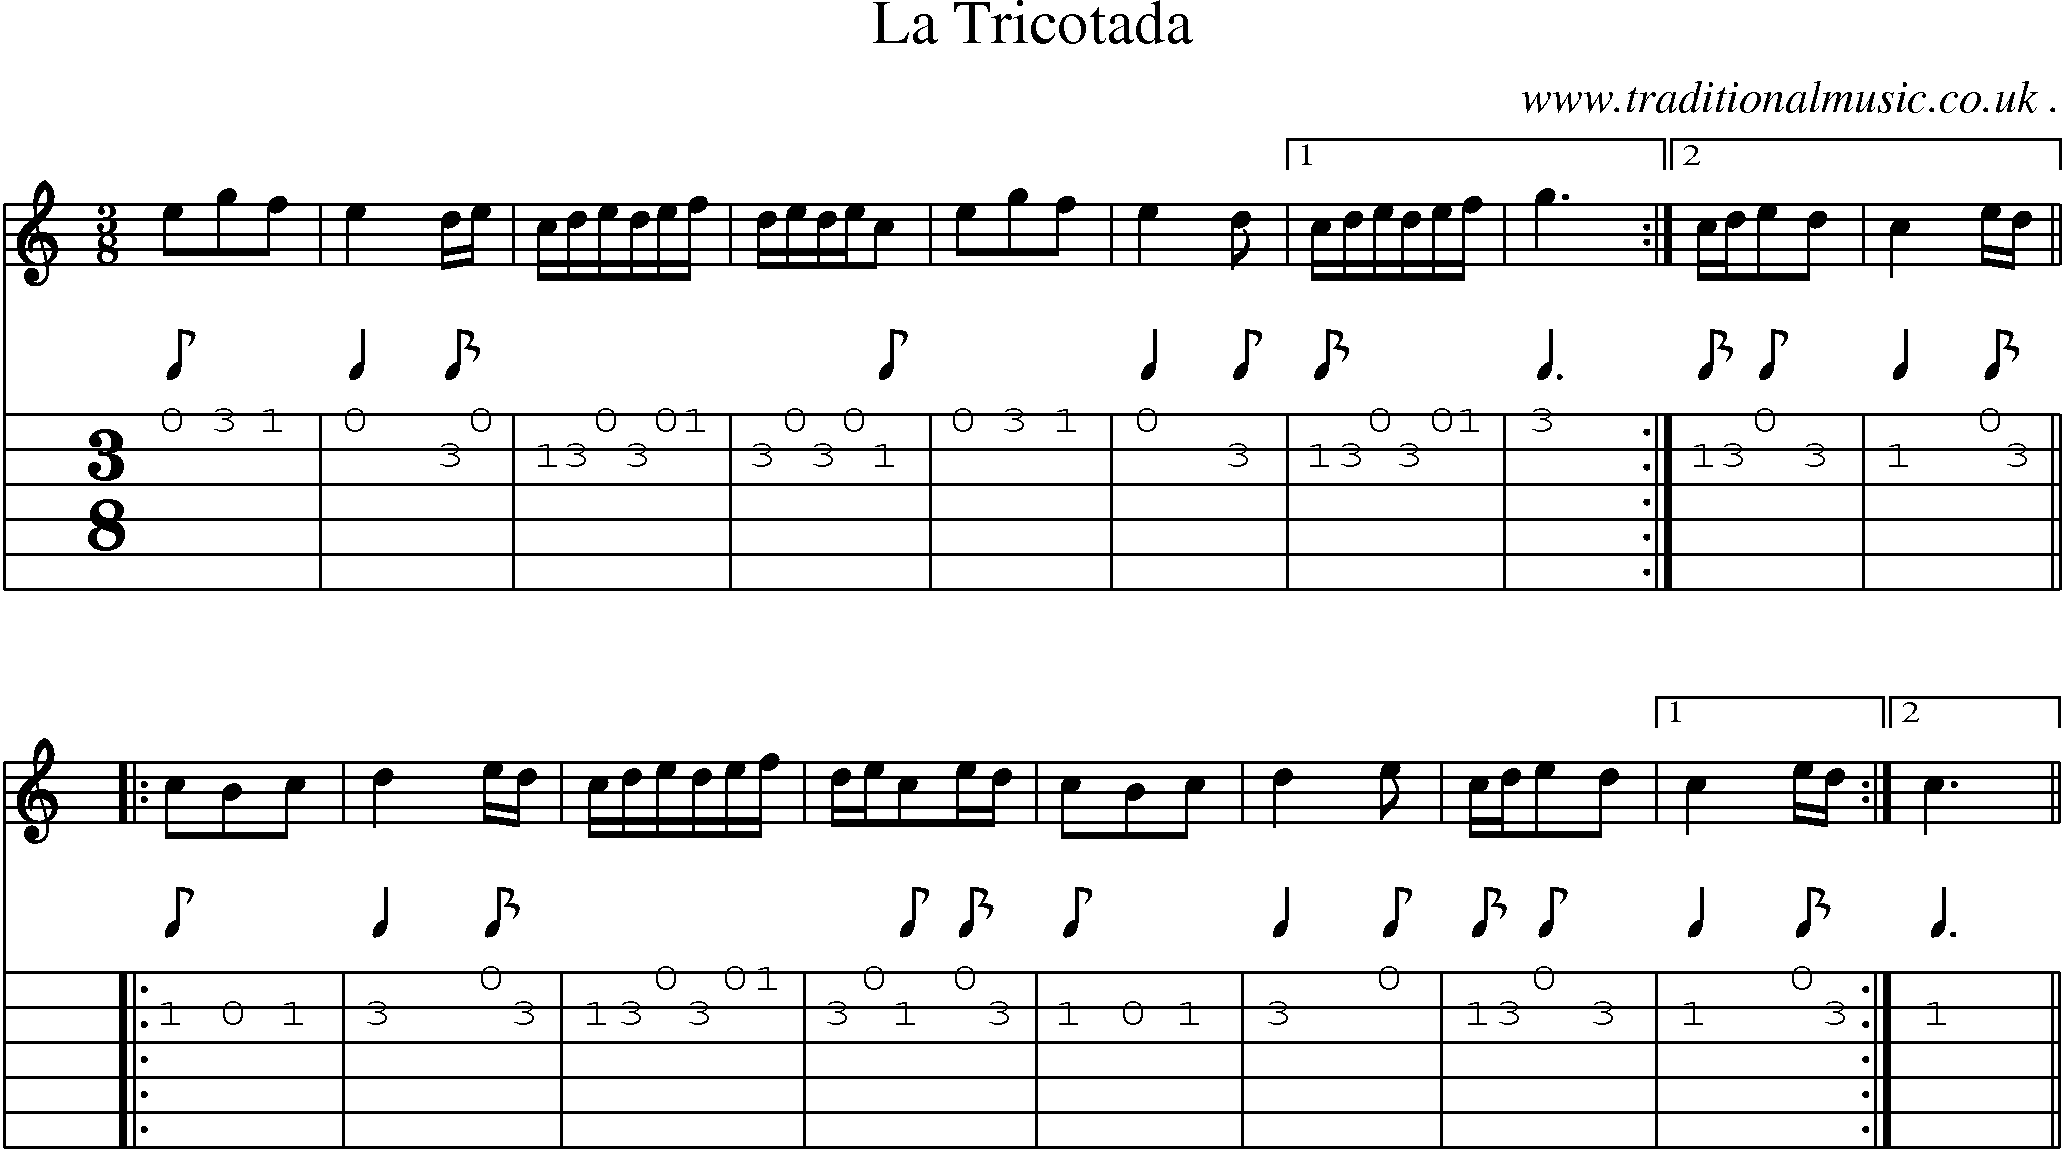 Sheet-Music and Guitar Tabs for La Tricotada